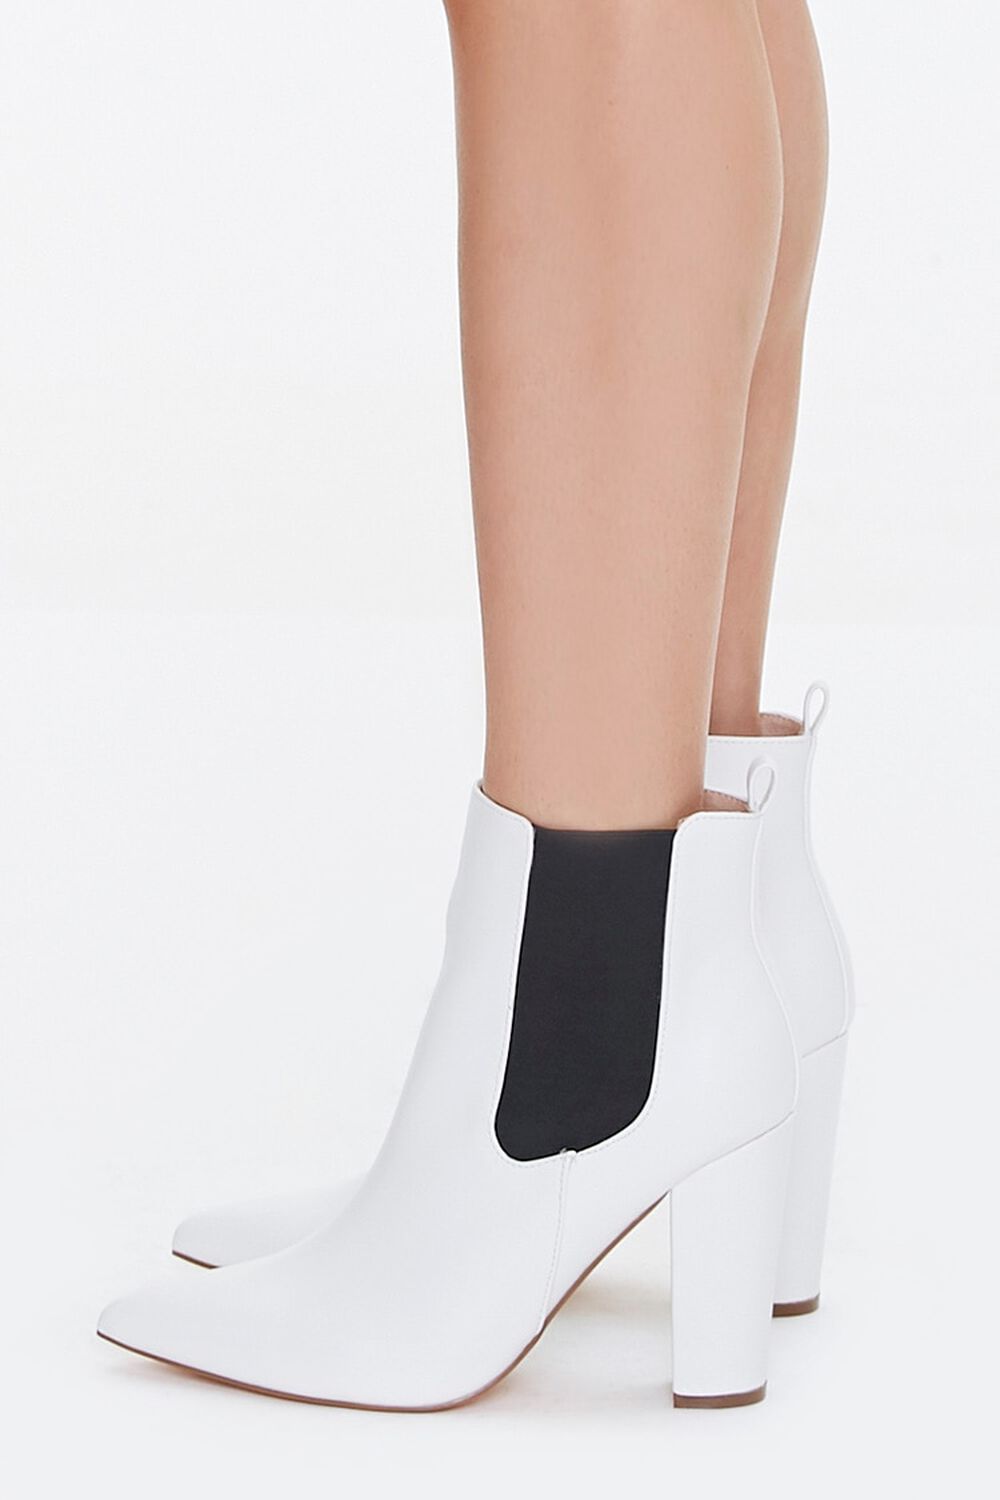 WHITE Pointed Toe Chelsea Boots, image 2